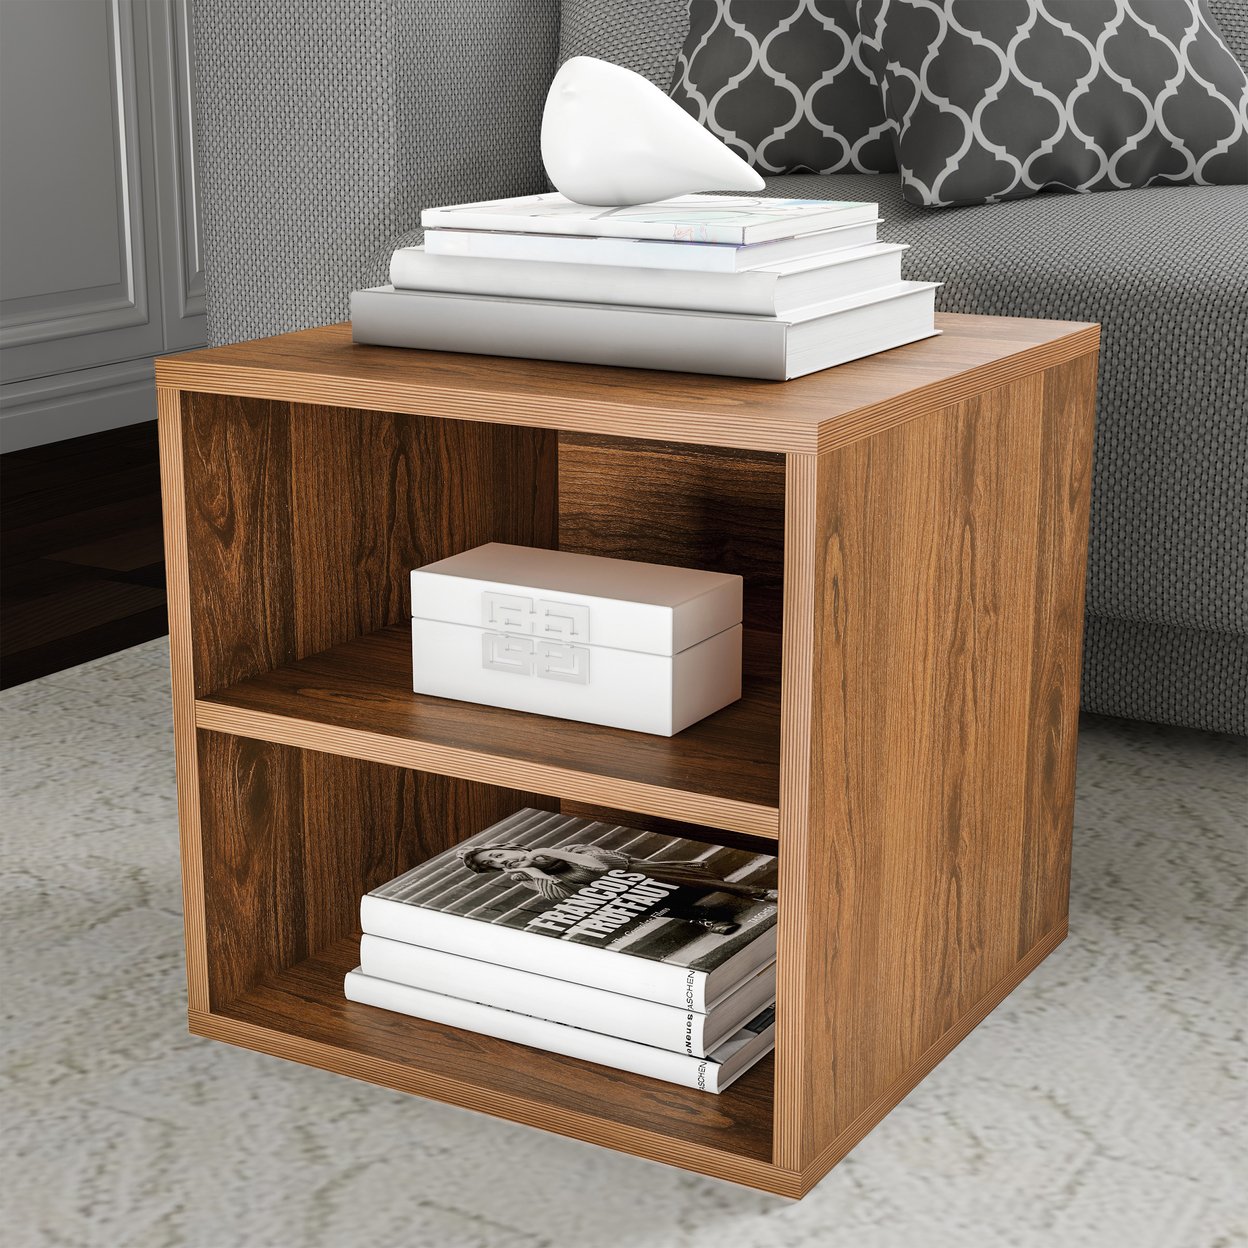 Brown End Table Cube Accent Table 16 Inches With Shelf Bedroom Livingroom